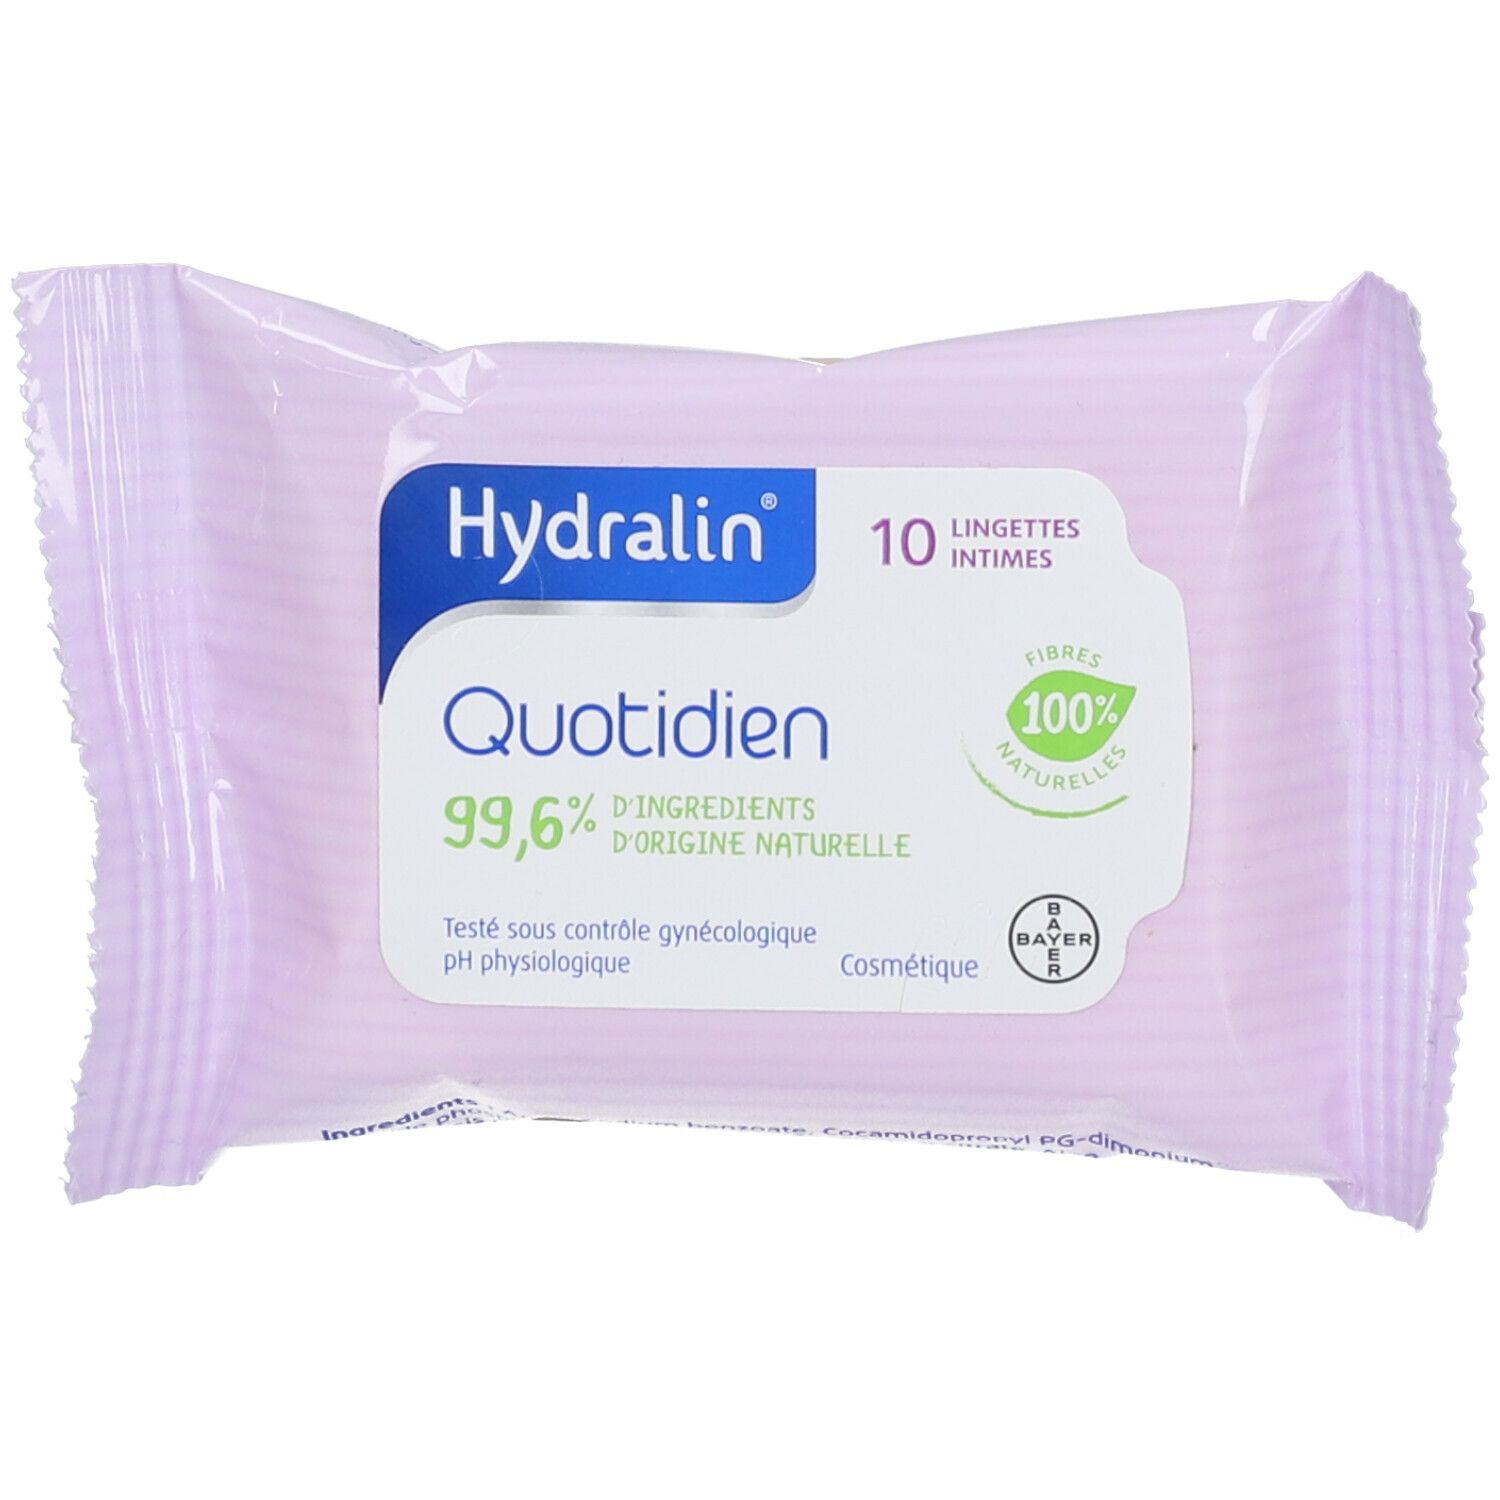 Hydralin® Apaisa lingettes intimes pc(s) lingette(s)